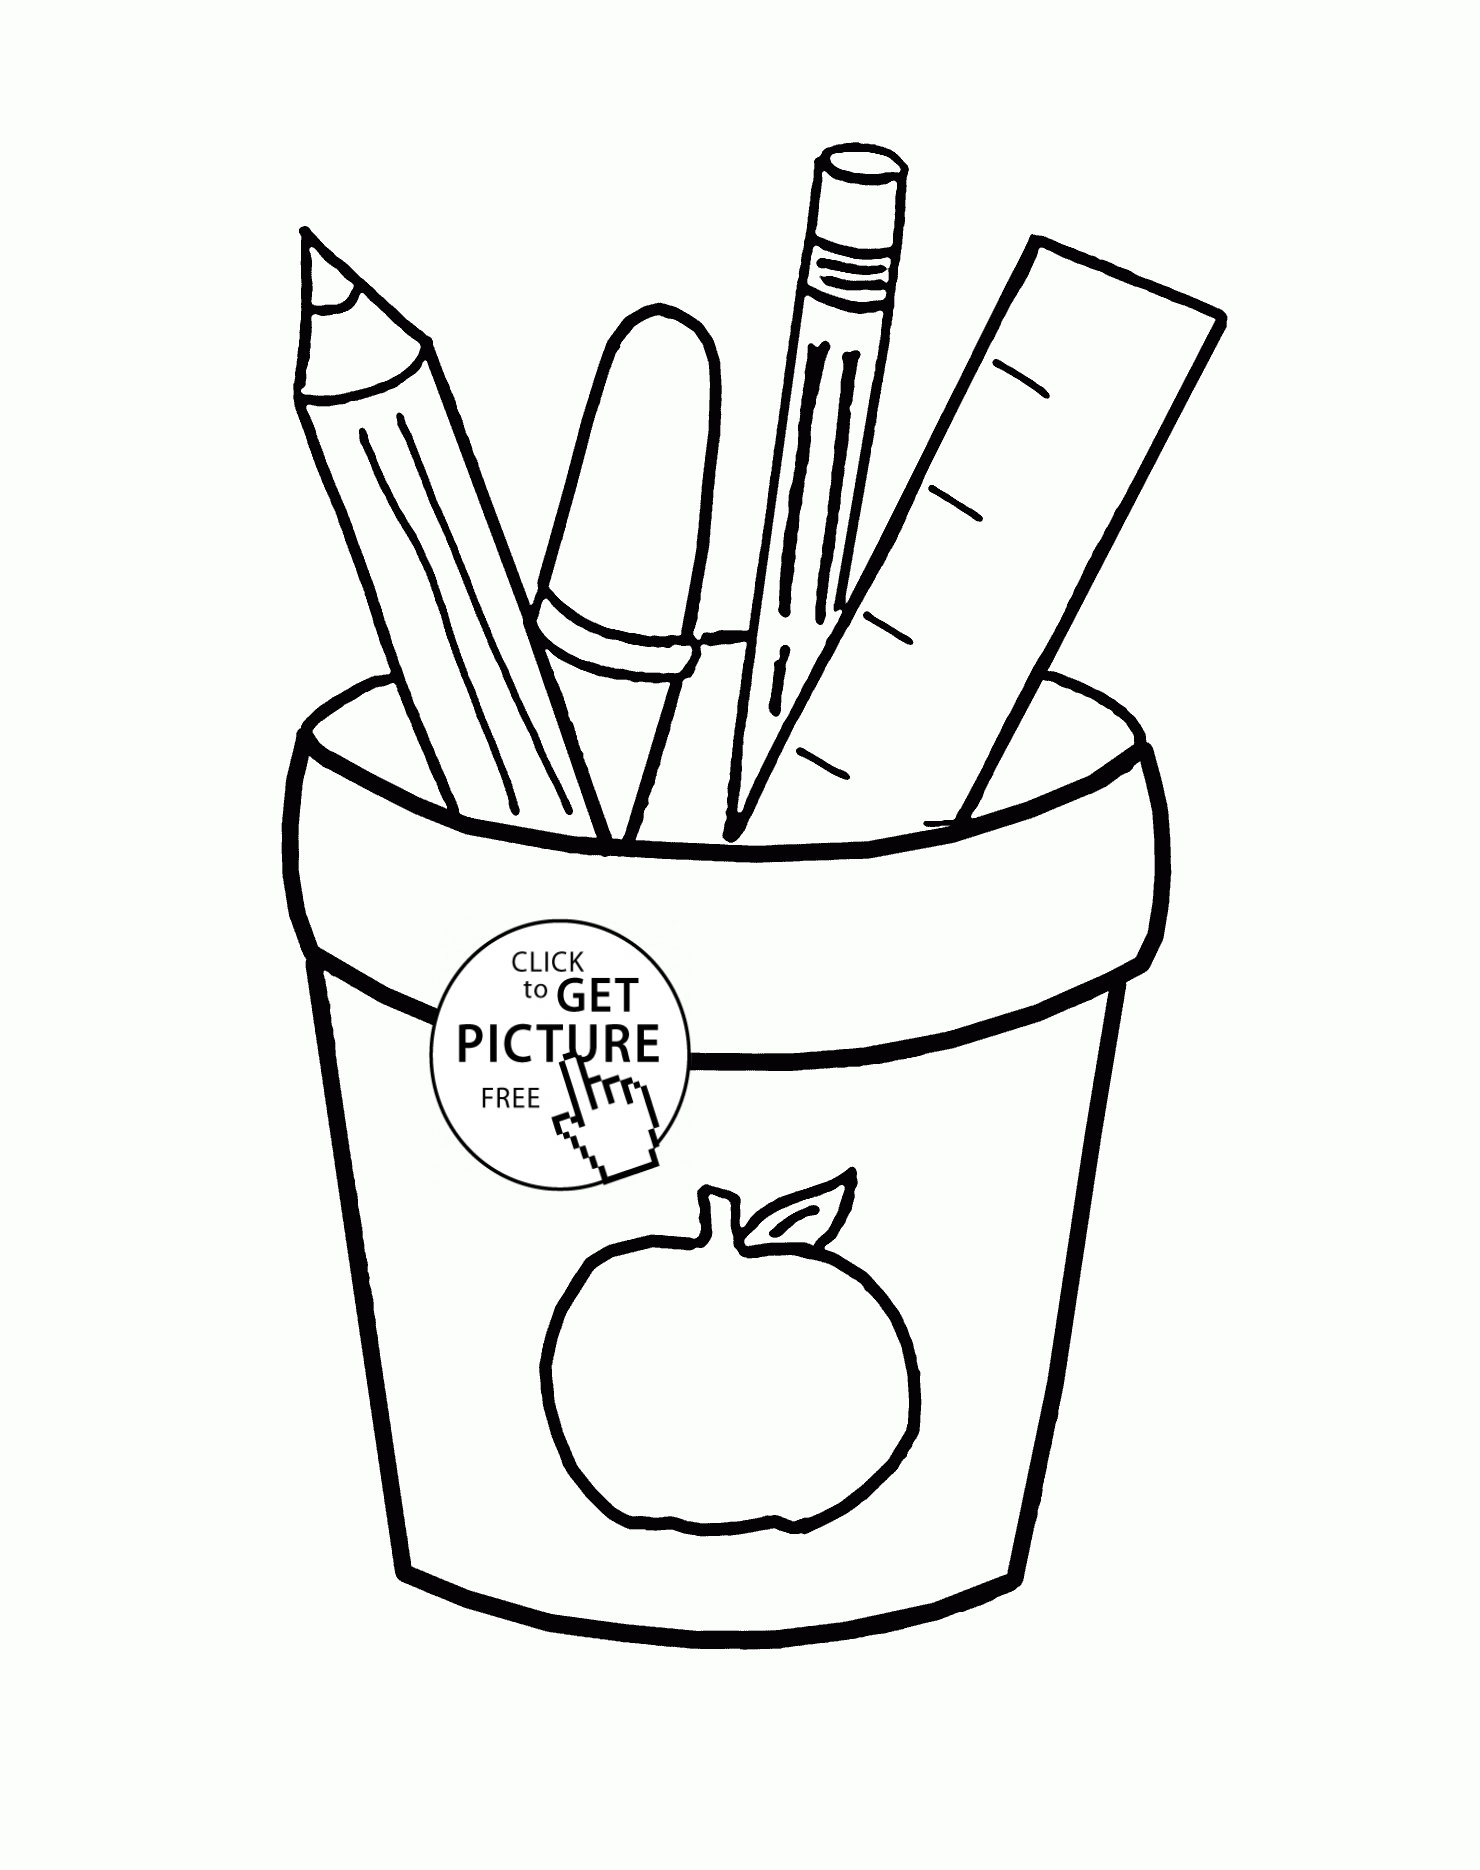 School Supplies coloring page for kids, school coloring pages printables  free - Wuppsy.c… | Preschool coloring pages, School coloring pages, Coloring  pages for kids